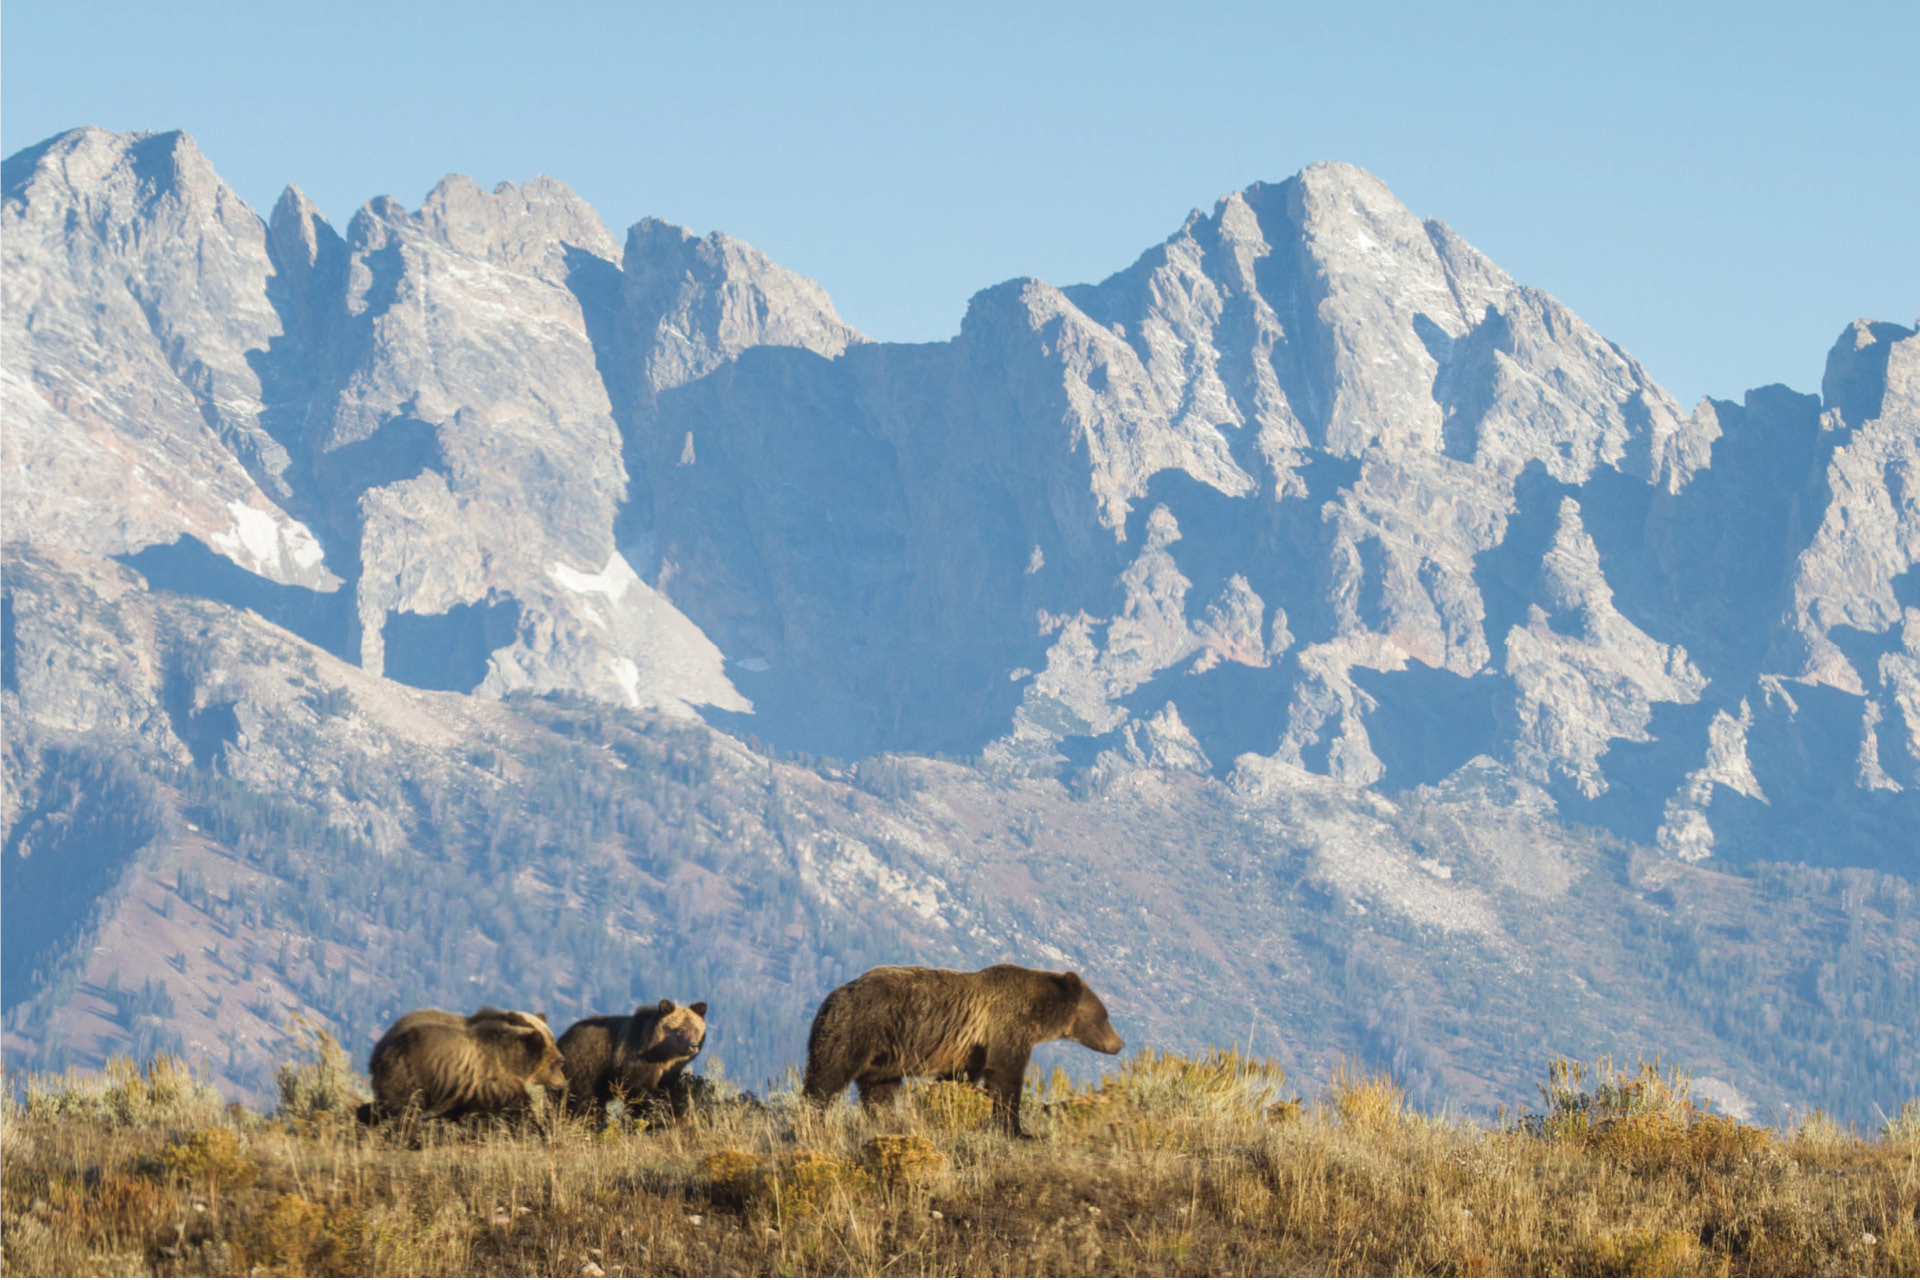 Grizzly 399 and cubs in front of the Tetons